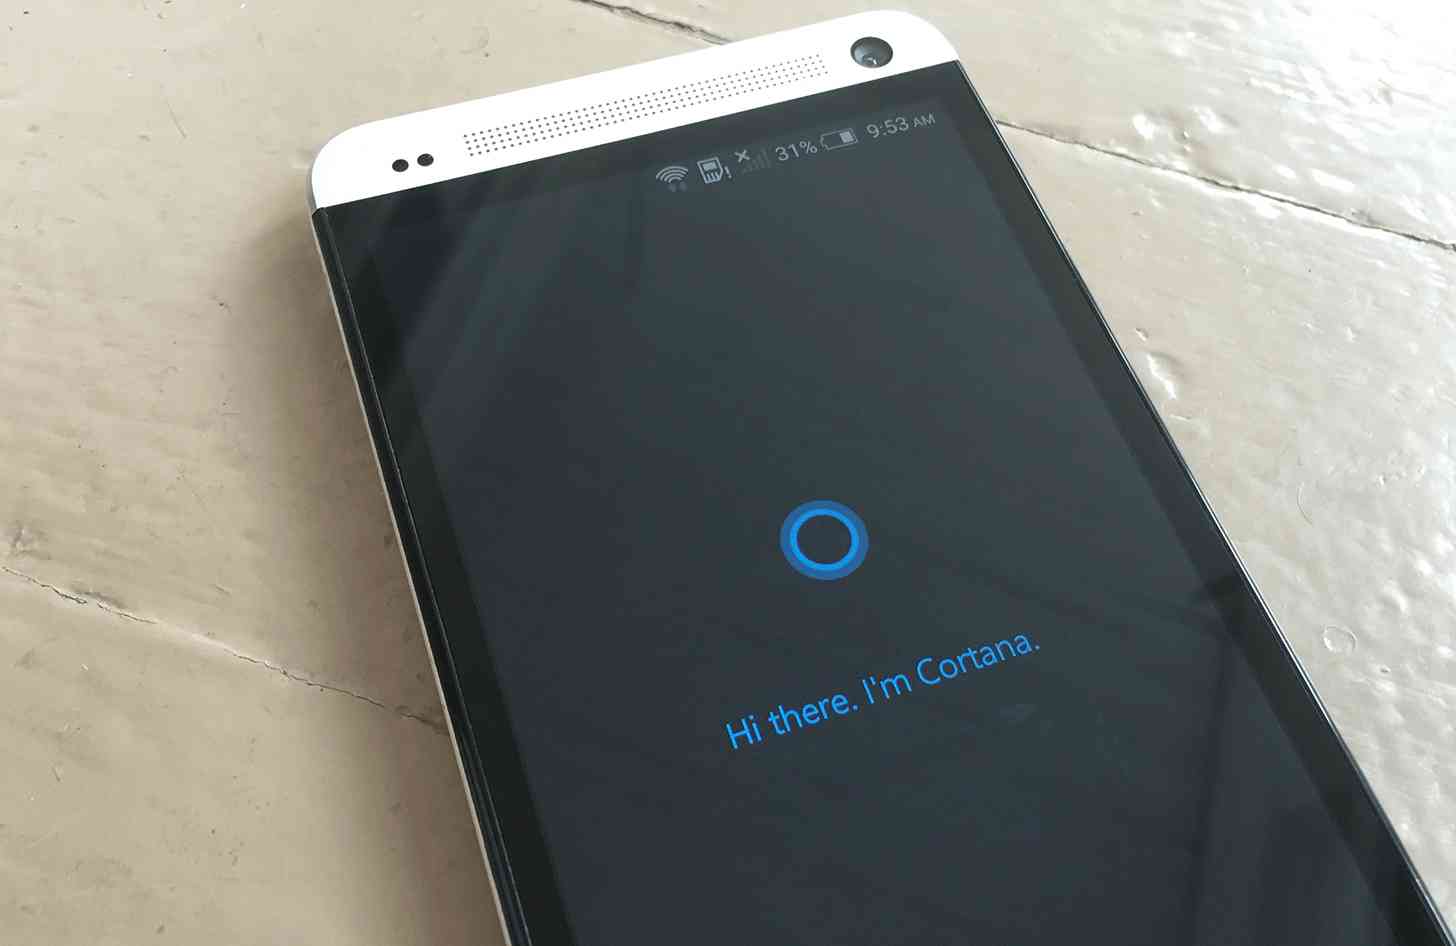 Cortana for Android app